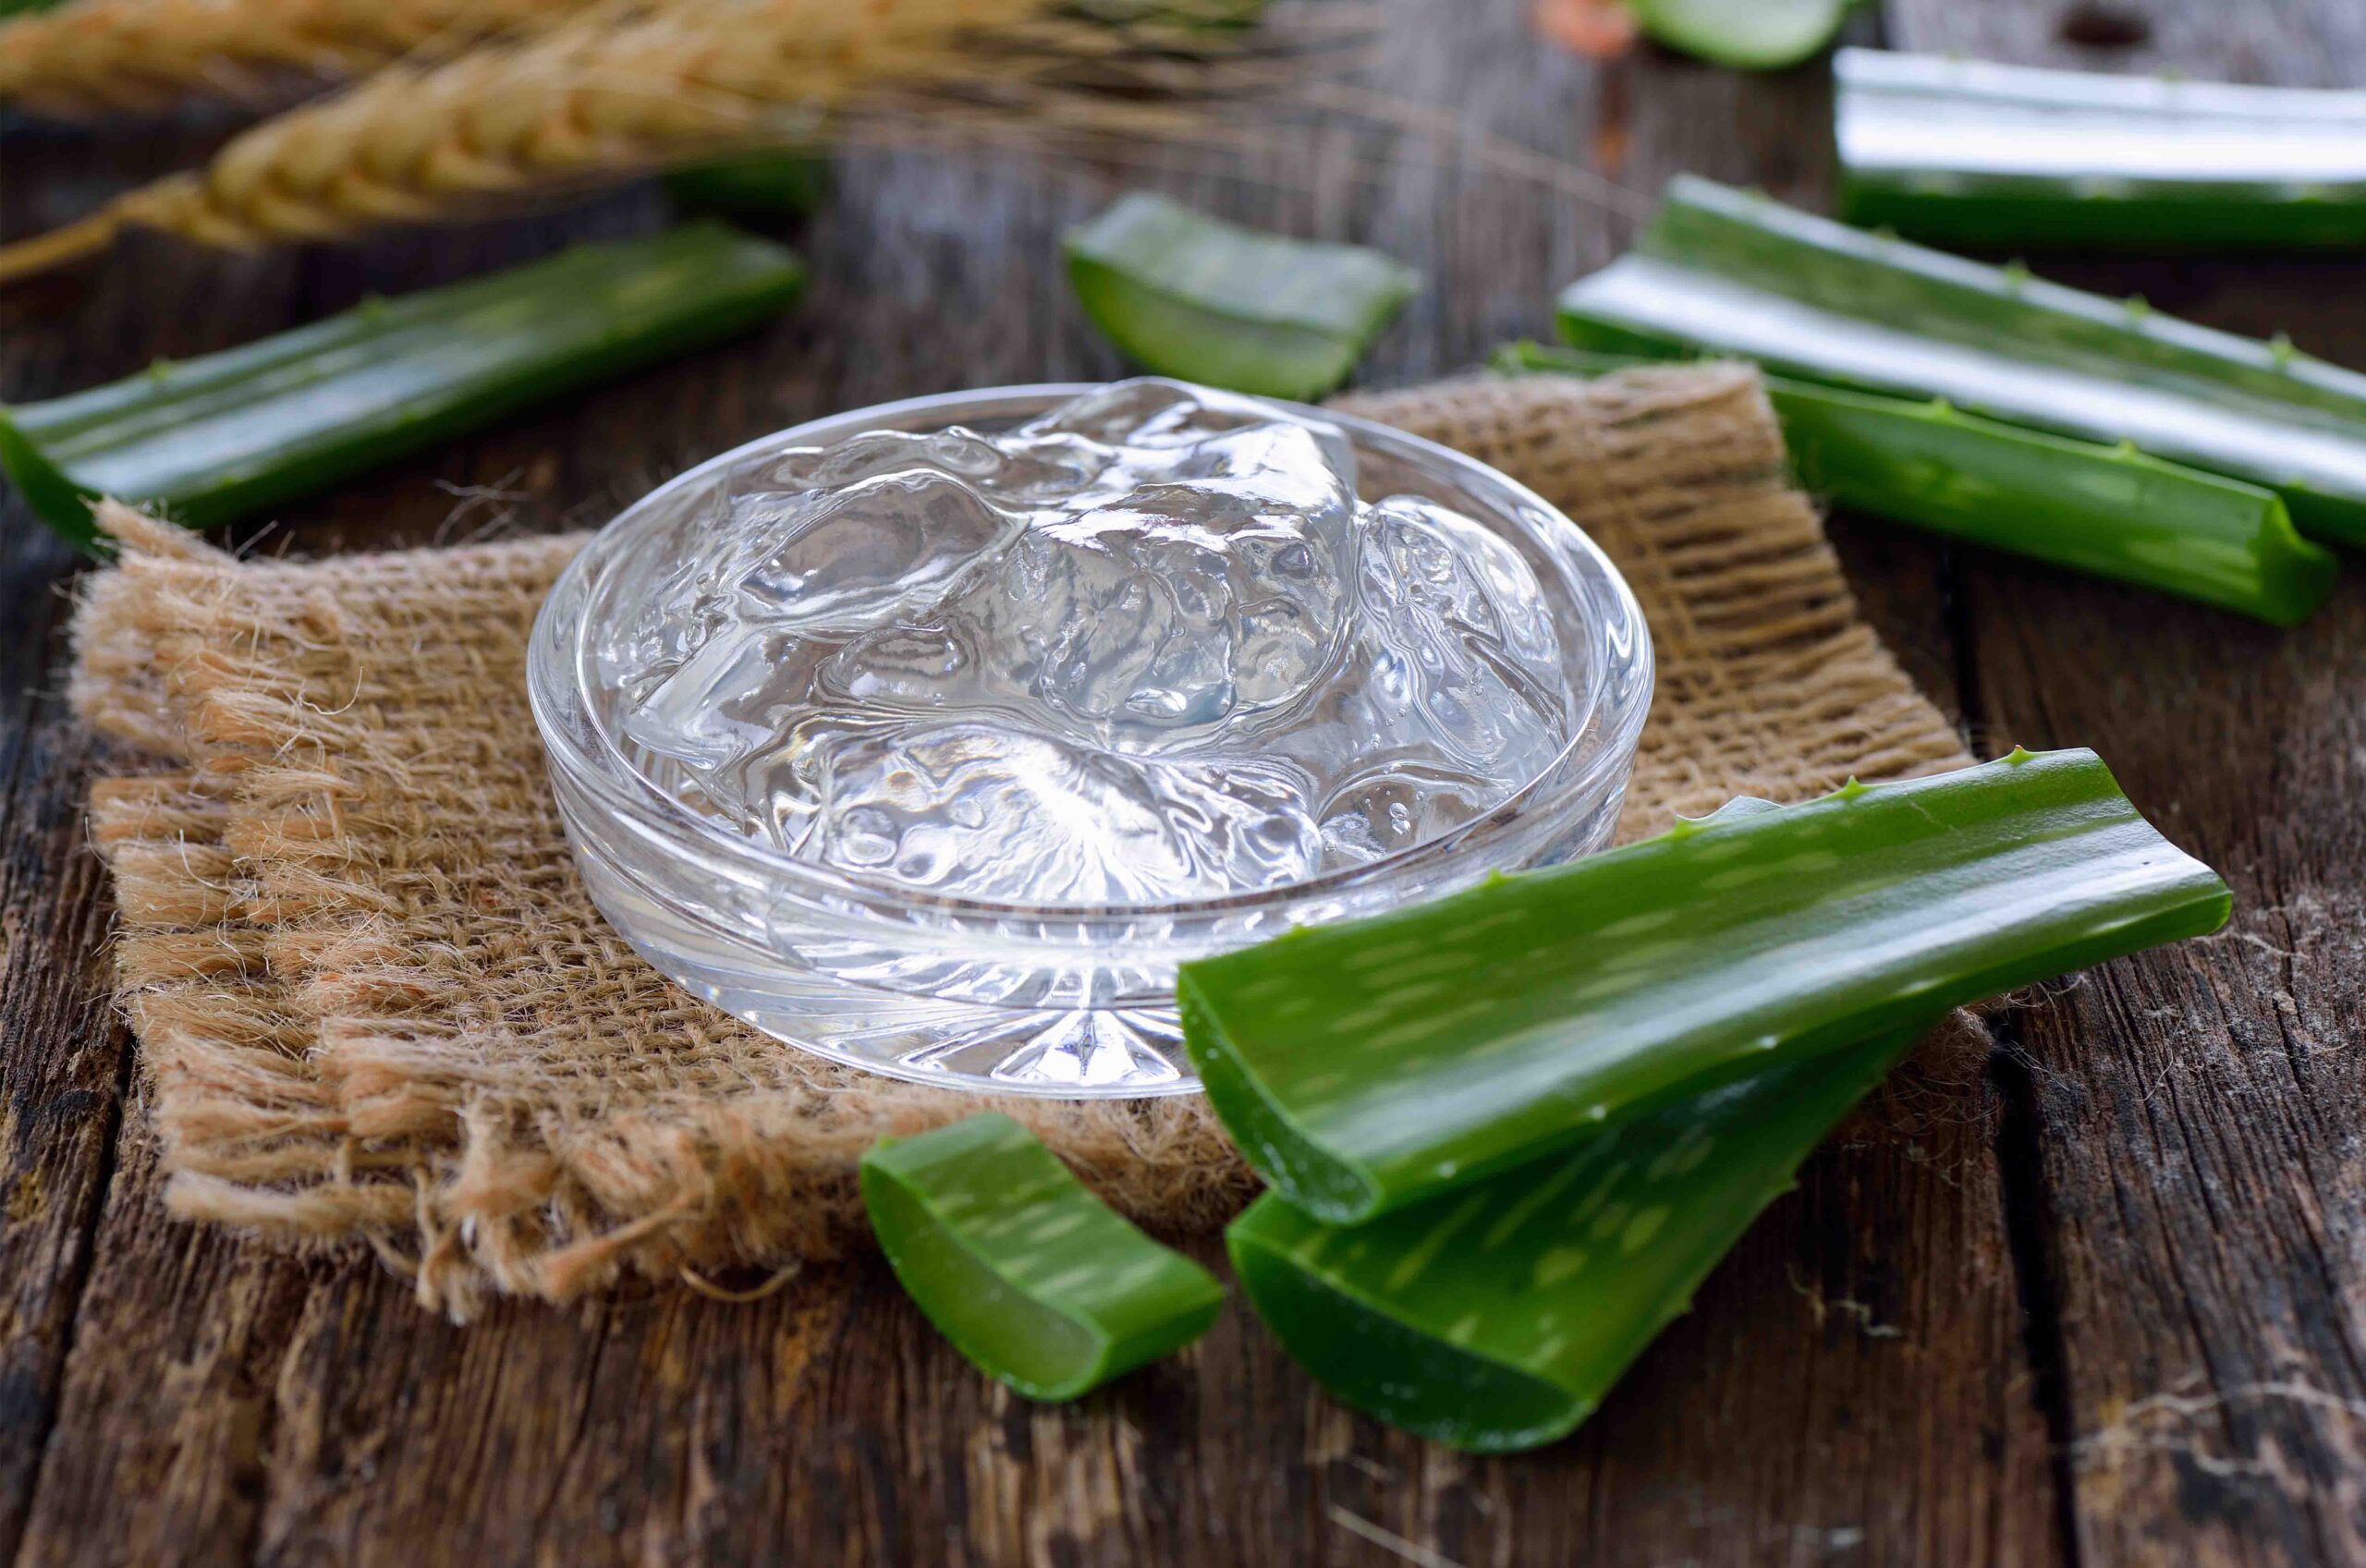 Uses and Benefits of Aloe Vera for Skin, Hair, and Health